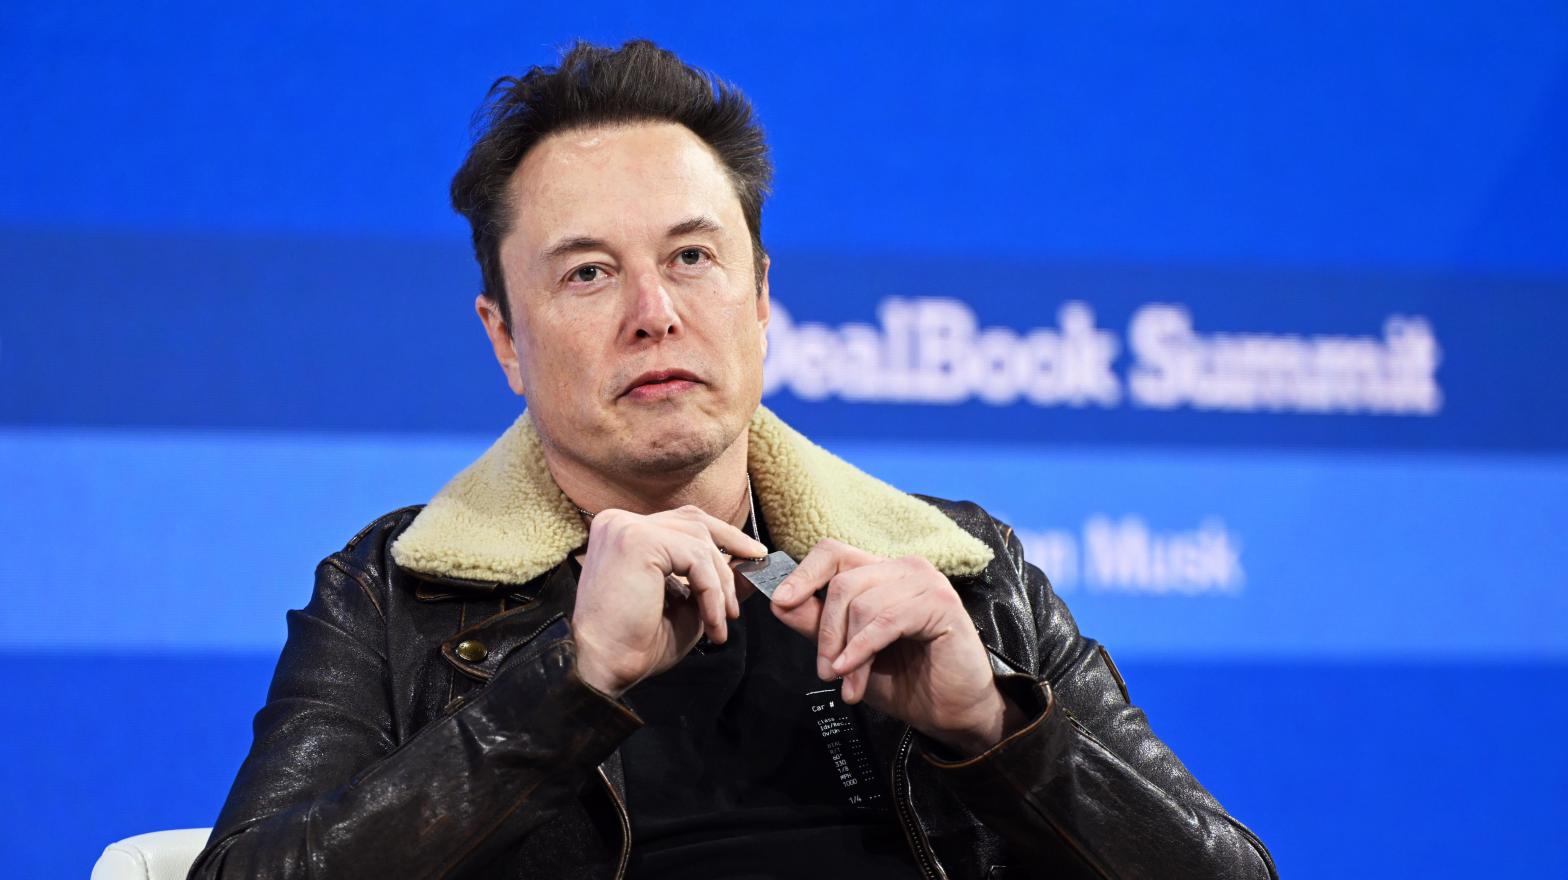 13 Brutal Stories From People Swindled By Elon Musk Impersonation Scams